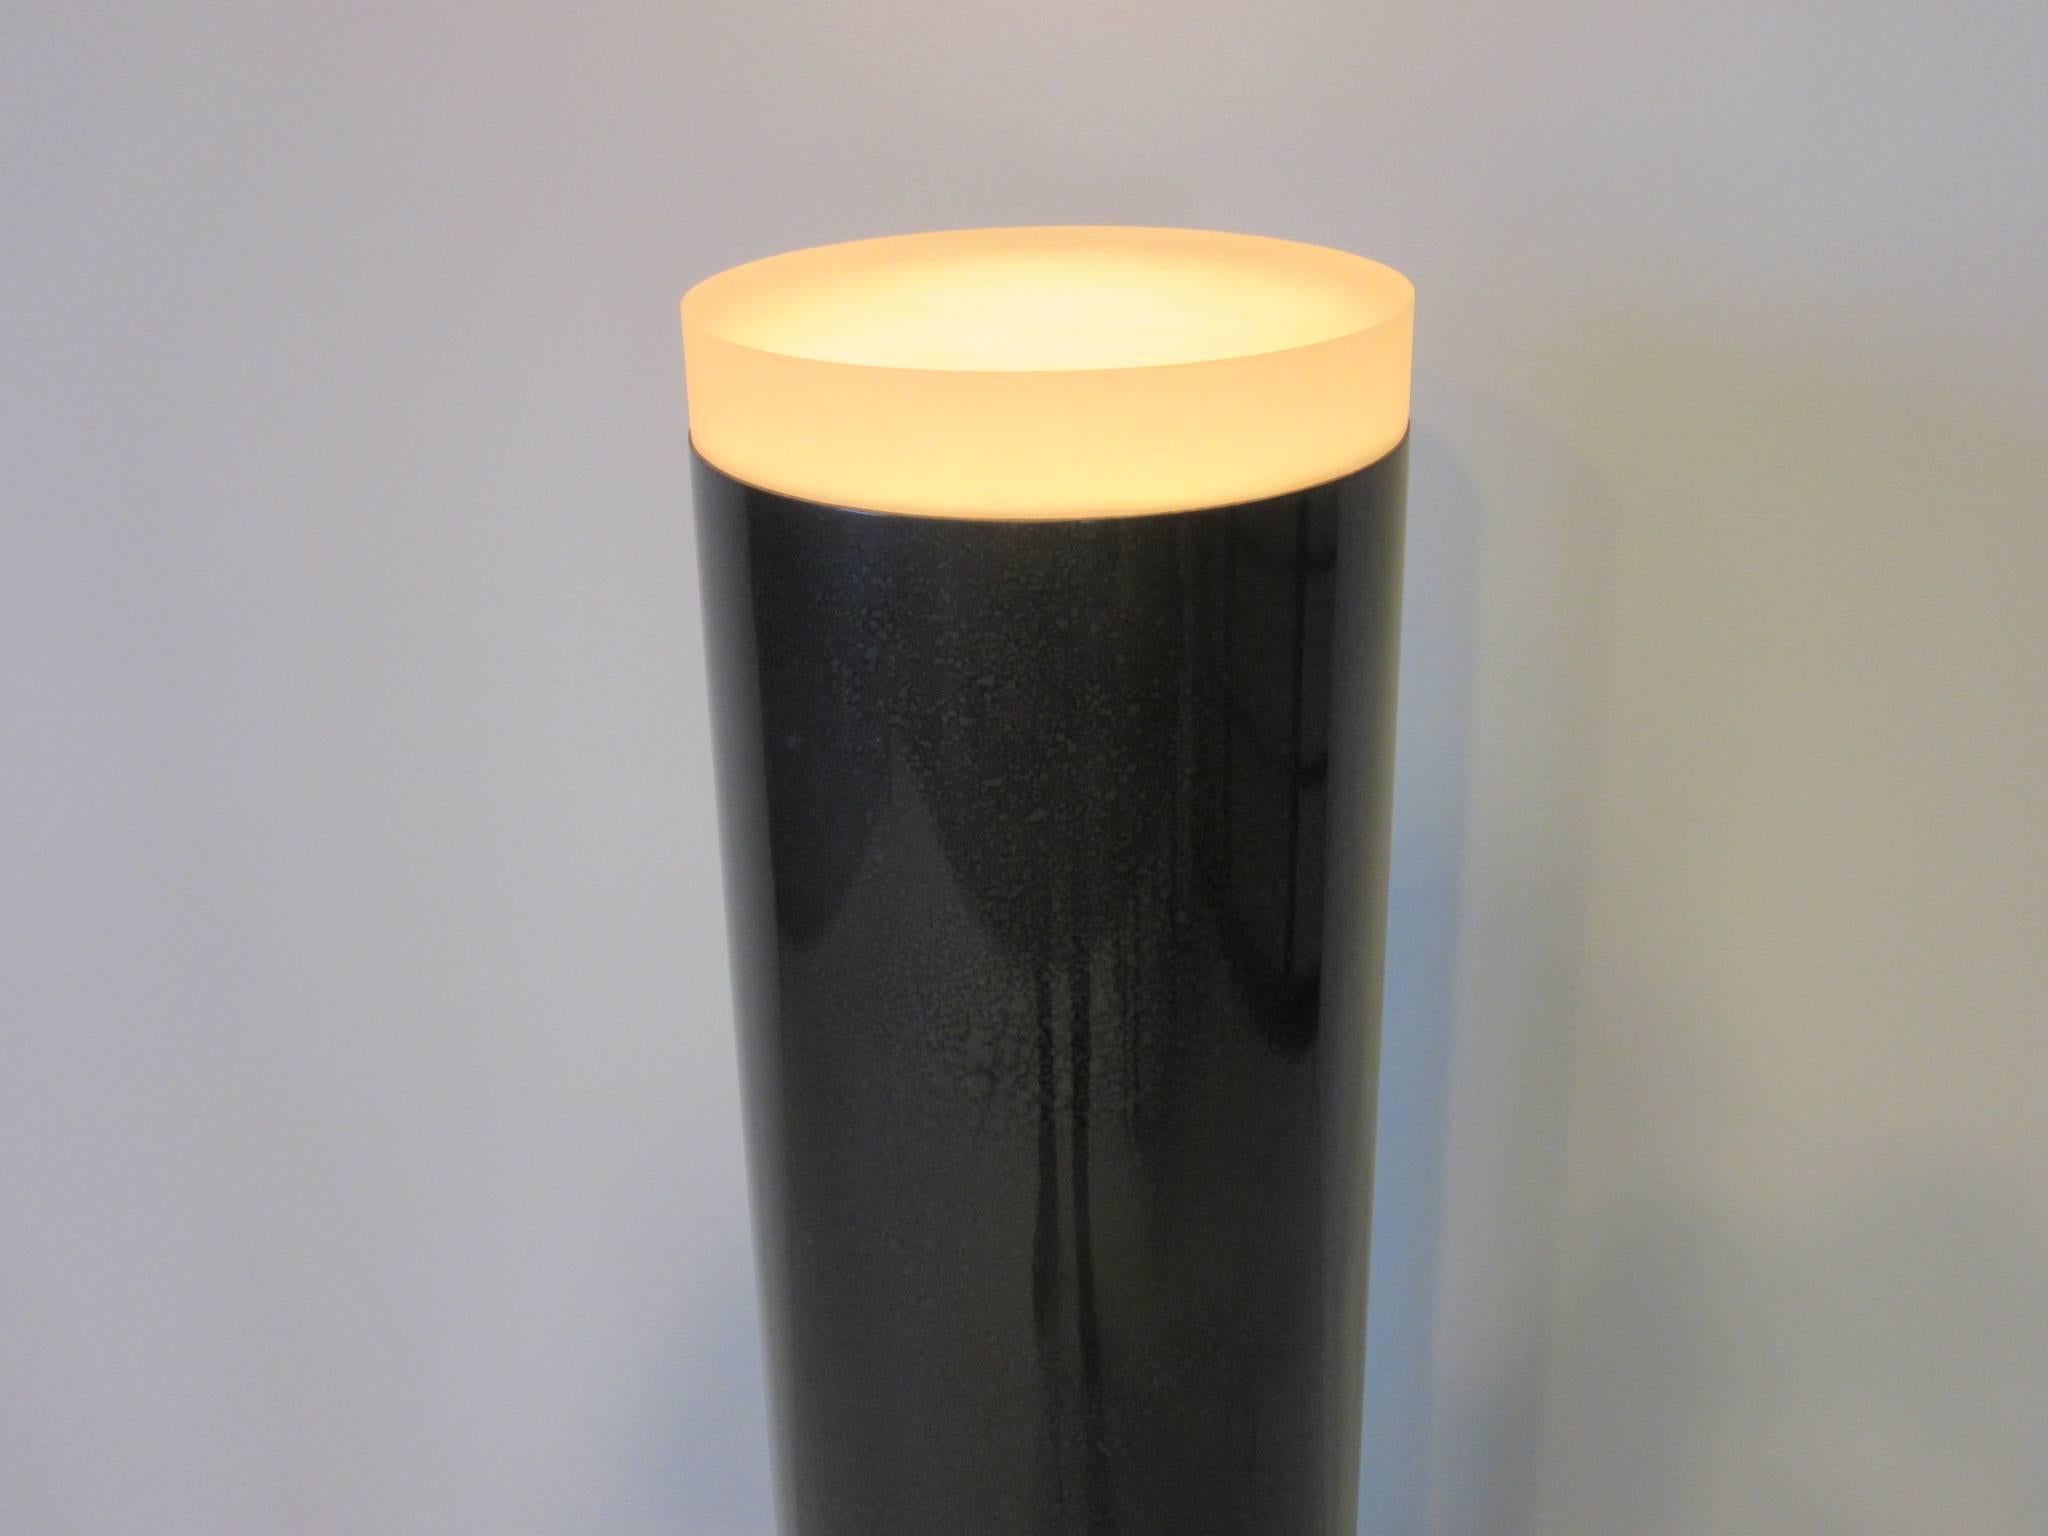 A Lucite Memphis styled column pedestal finished in a gun metal gray hammer coating with step up base and thick frosted Lucite light up top and foot control switch the top diameter is 10.75